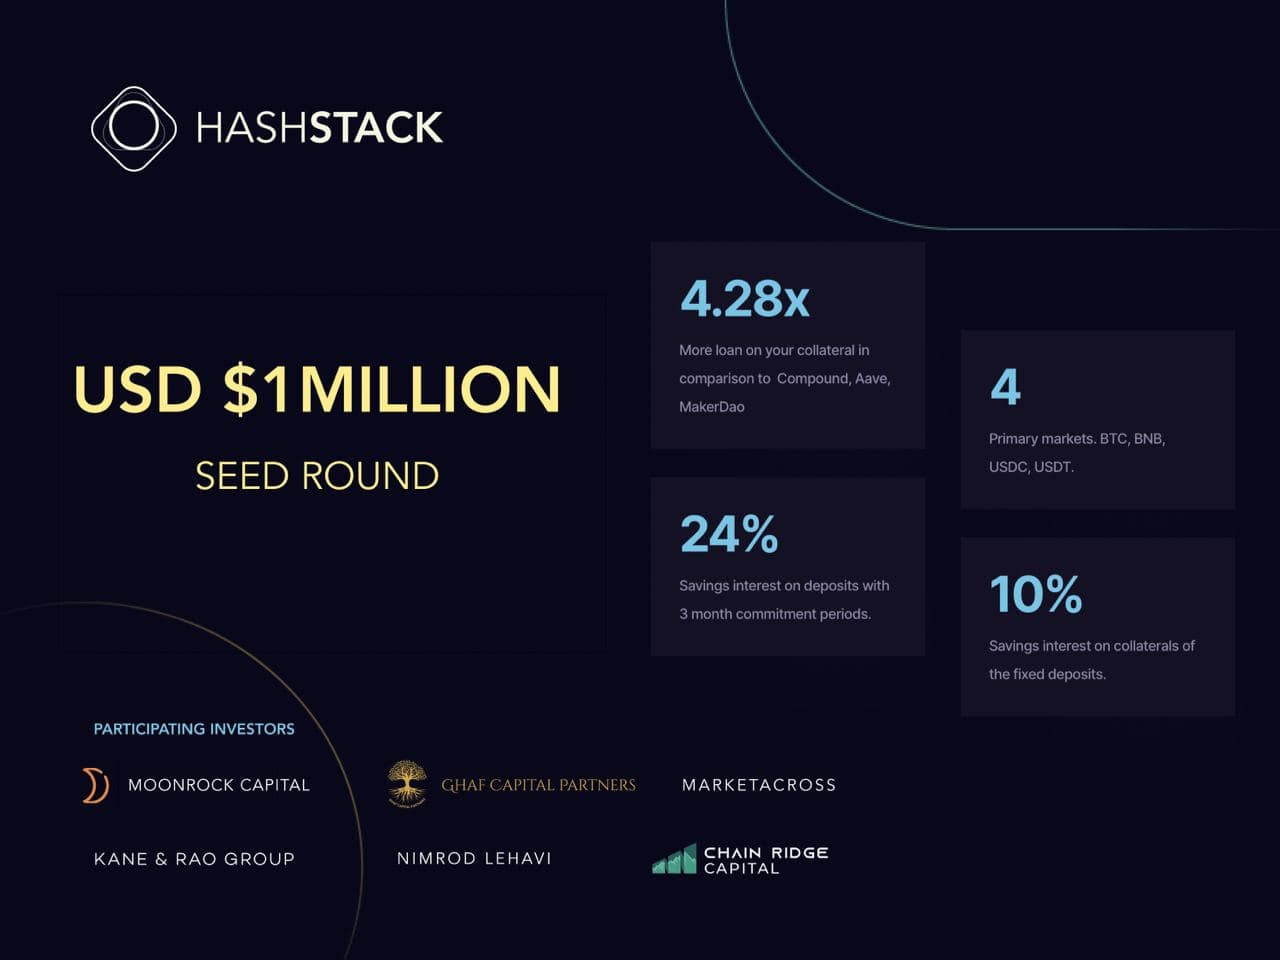 Hashstack Finance Announces the closing of its $1 million seed funding round